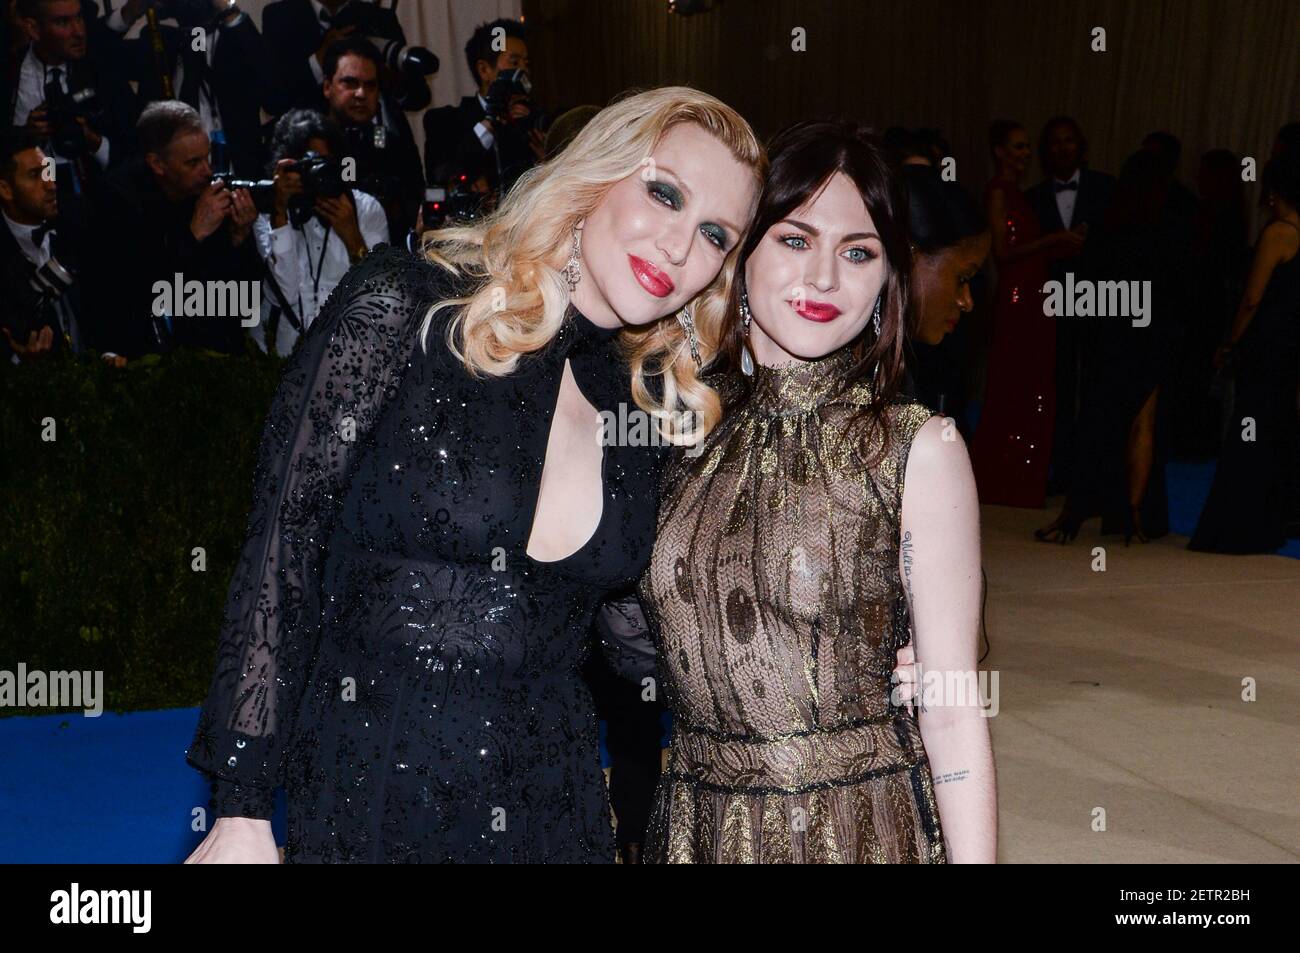 Courtney Love and Frances Bean Cobain arriving at The Metropolitan Museum of Art Costume Institute Benefit celebrating the opening of Rei Kawakubo / Comme des Garcons : Art of the In-Between held at The Metropolitan Museum of Art in New York, NY, on May 1, 2017. (Photo by Anthony Behar) *** Please Use Credit from Credit Field *** Stock Photo